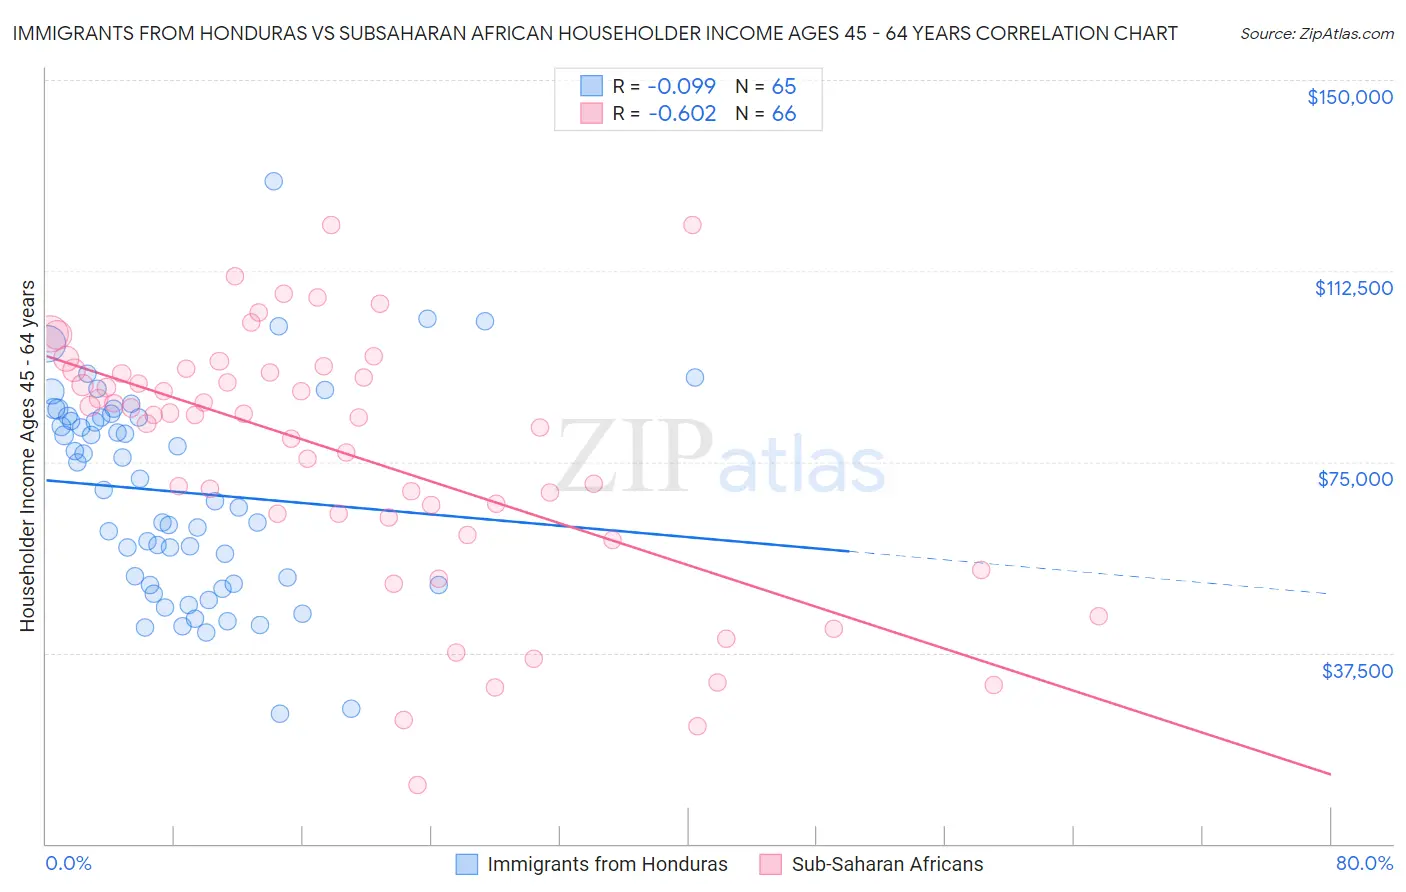 Immigrants from Honduras vs Subsaharan African Householder Income Ages 45 - 64 years